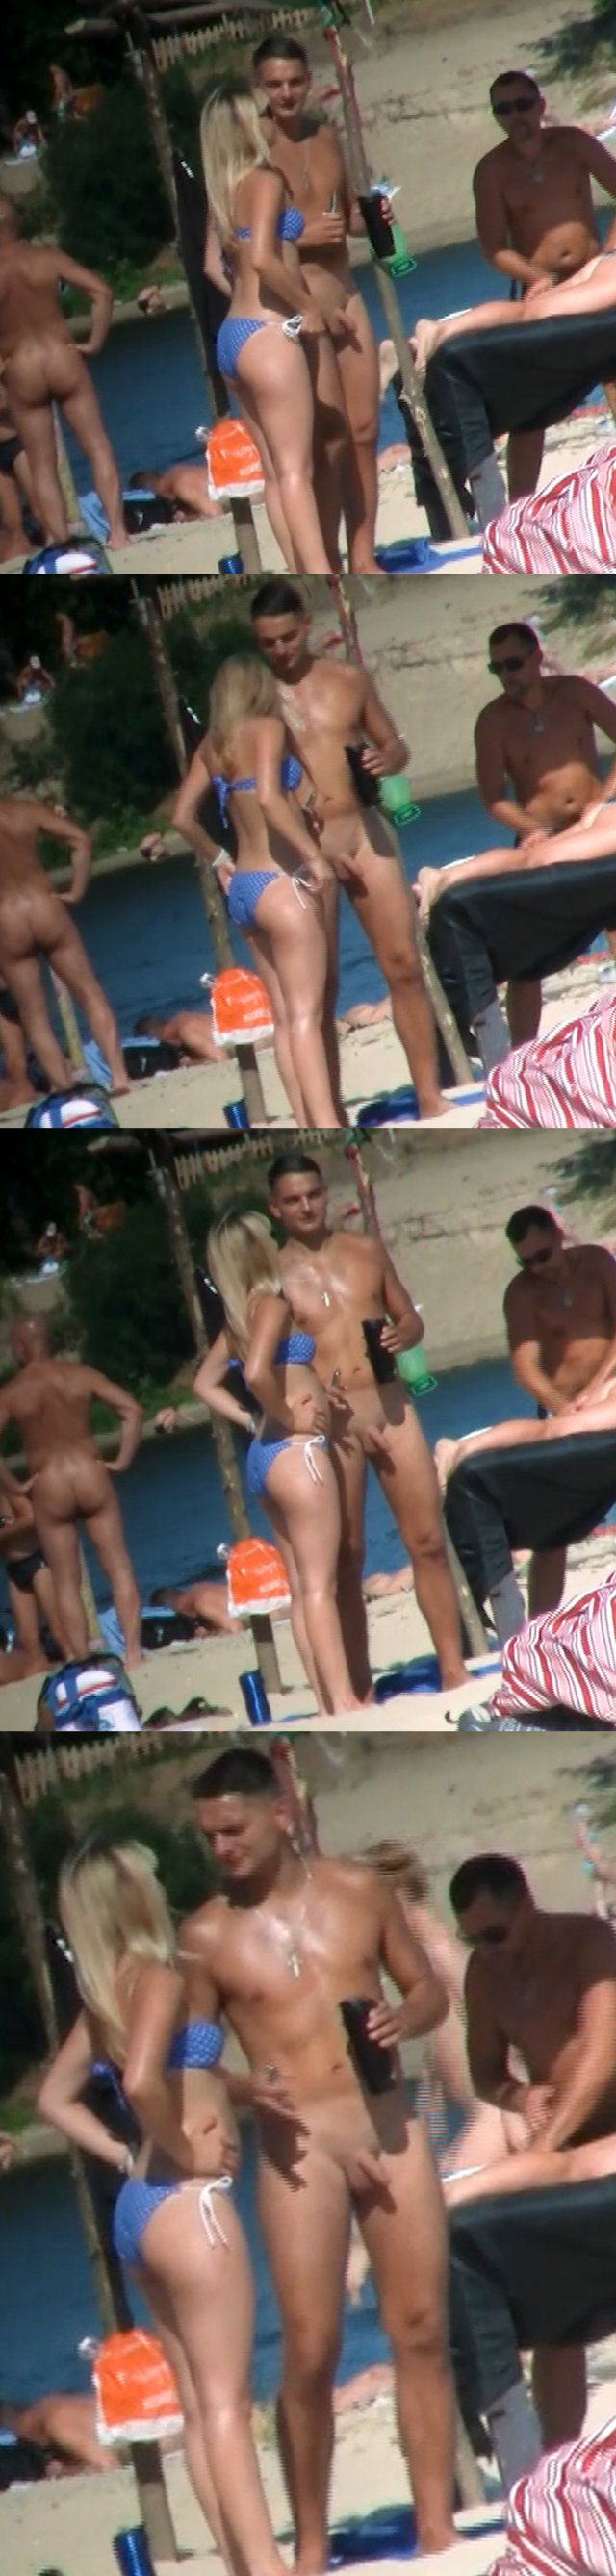 straight uncut nudist guy caught naked by hidden camera at the nudist beach